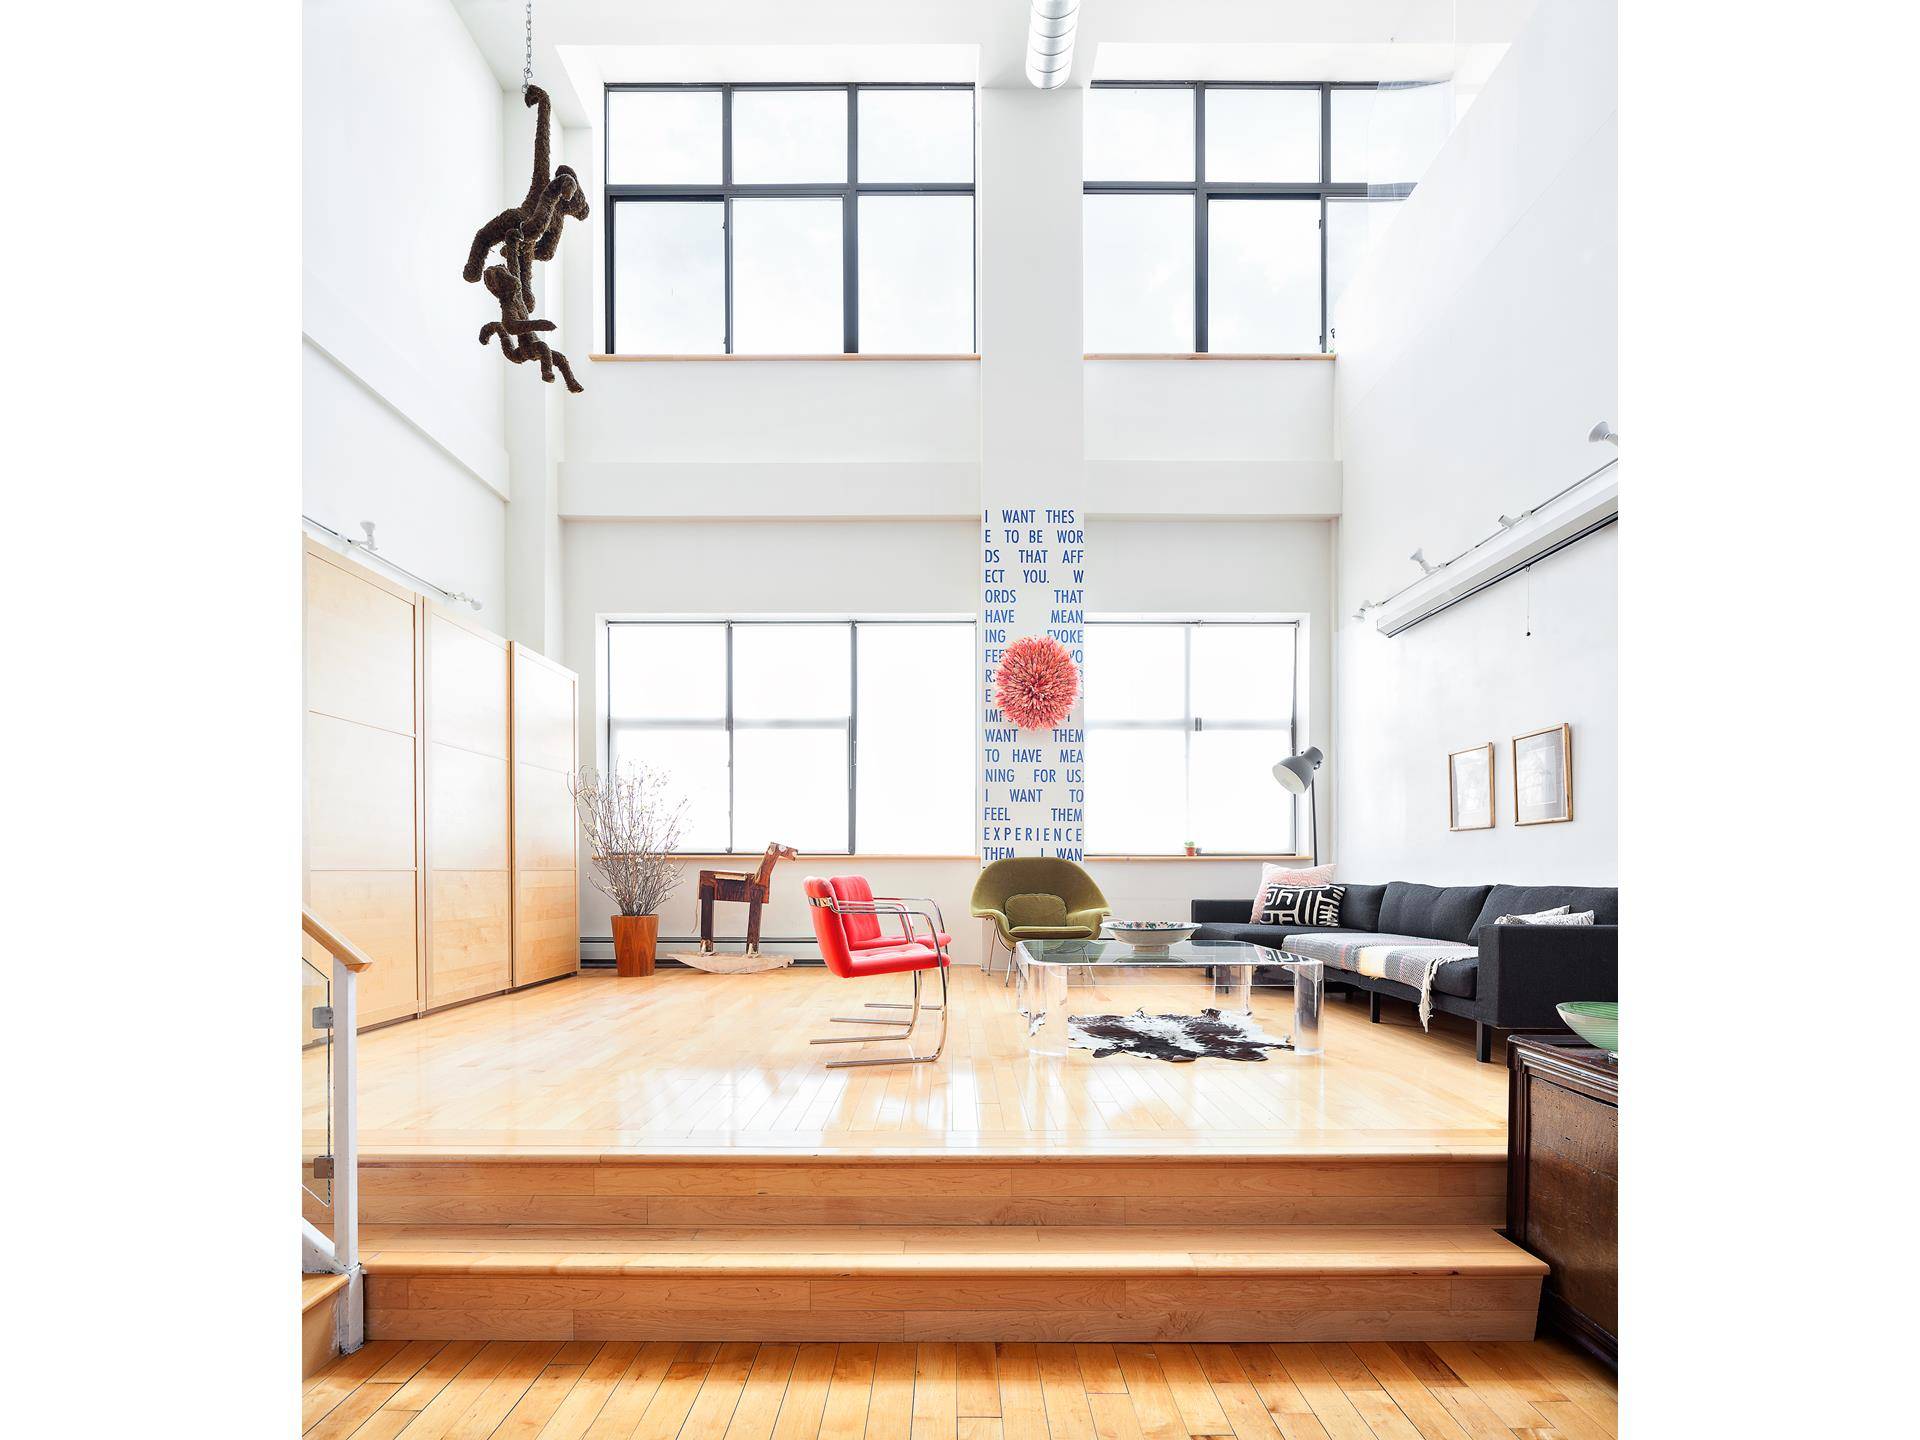 Welcome home to 535 Dean Street PH108 A one of a kind loft condo in the heart of Prospect Heights.